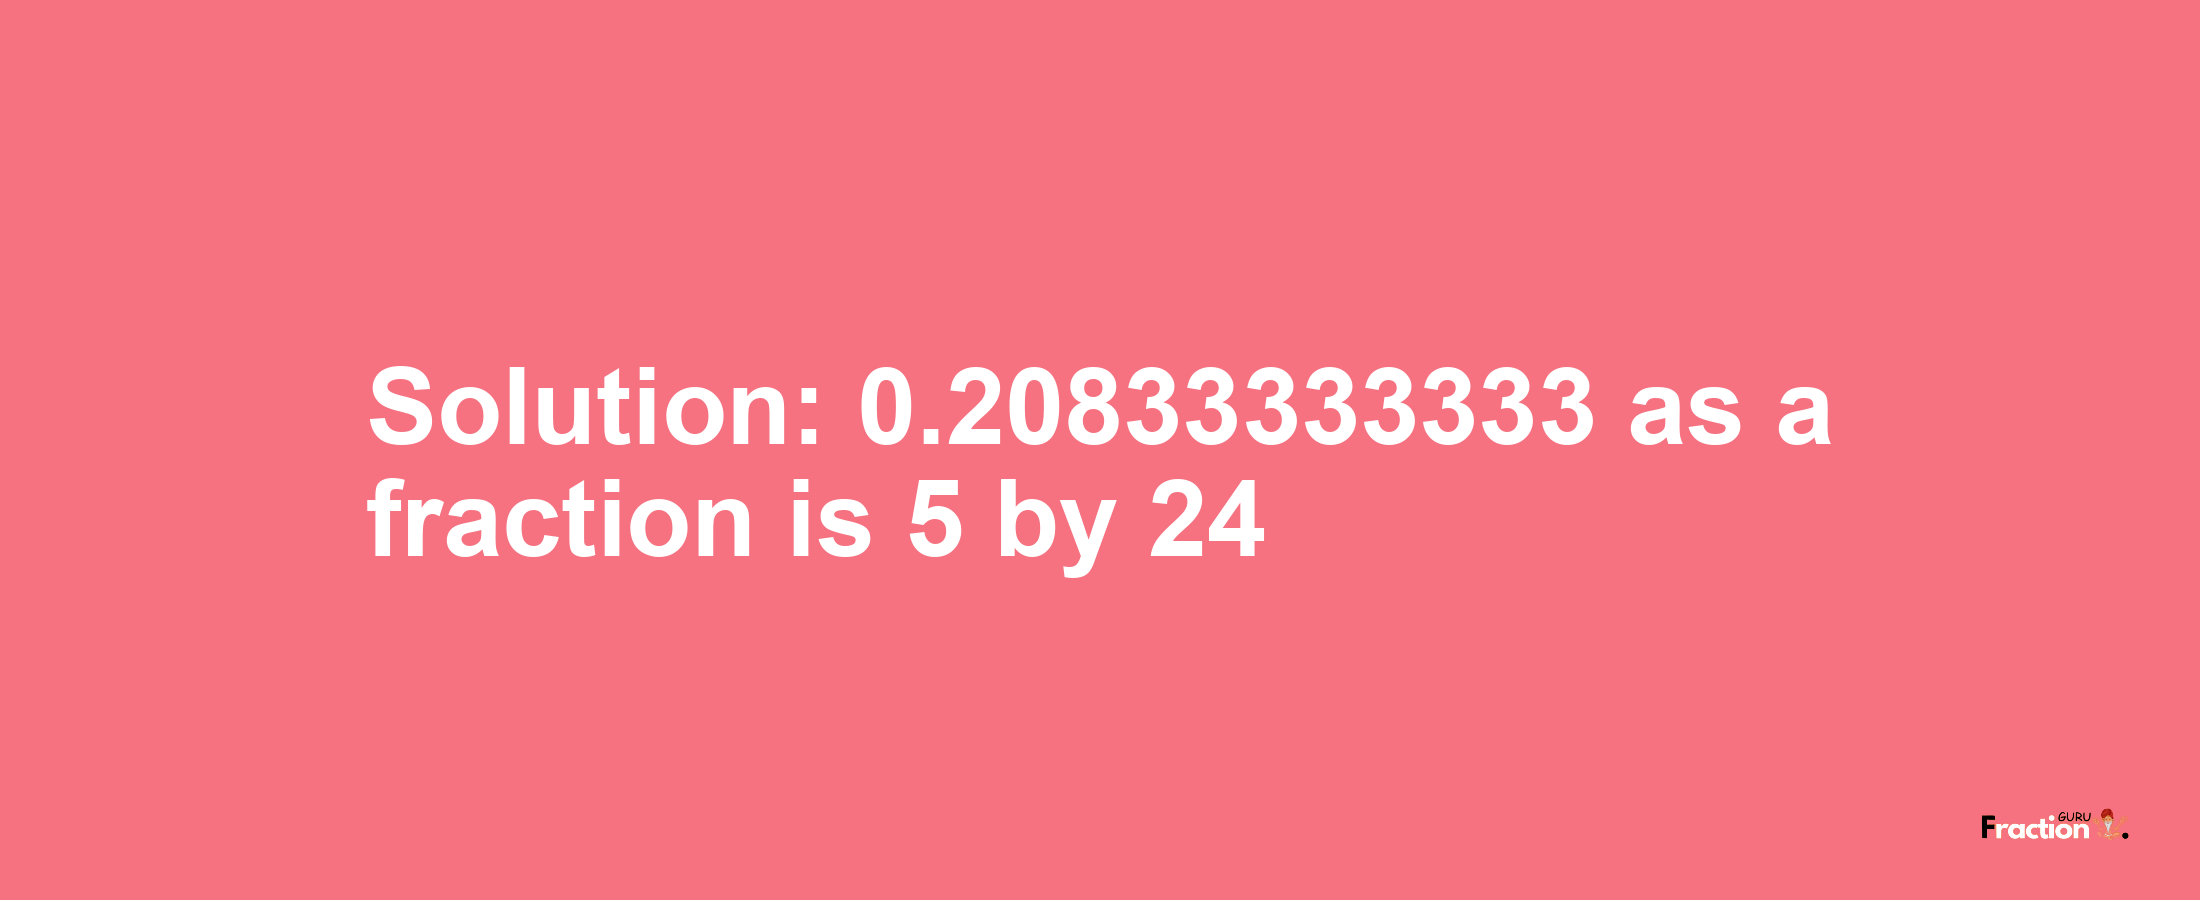 Solution:0.20833333333 as a fraction is 5/24